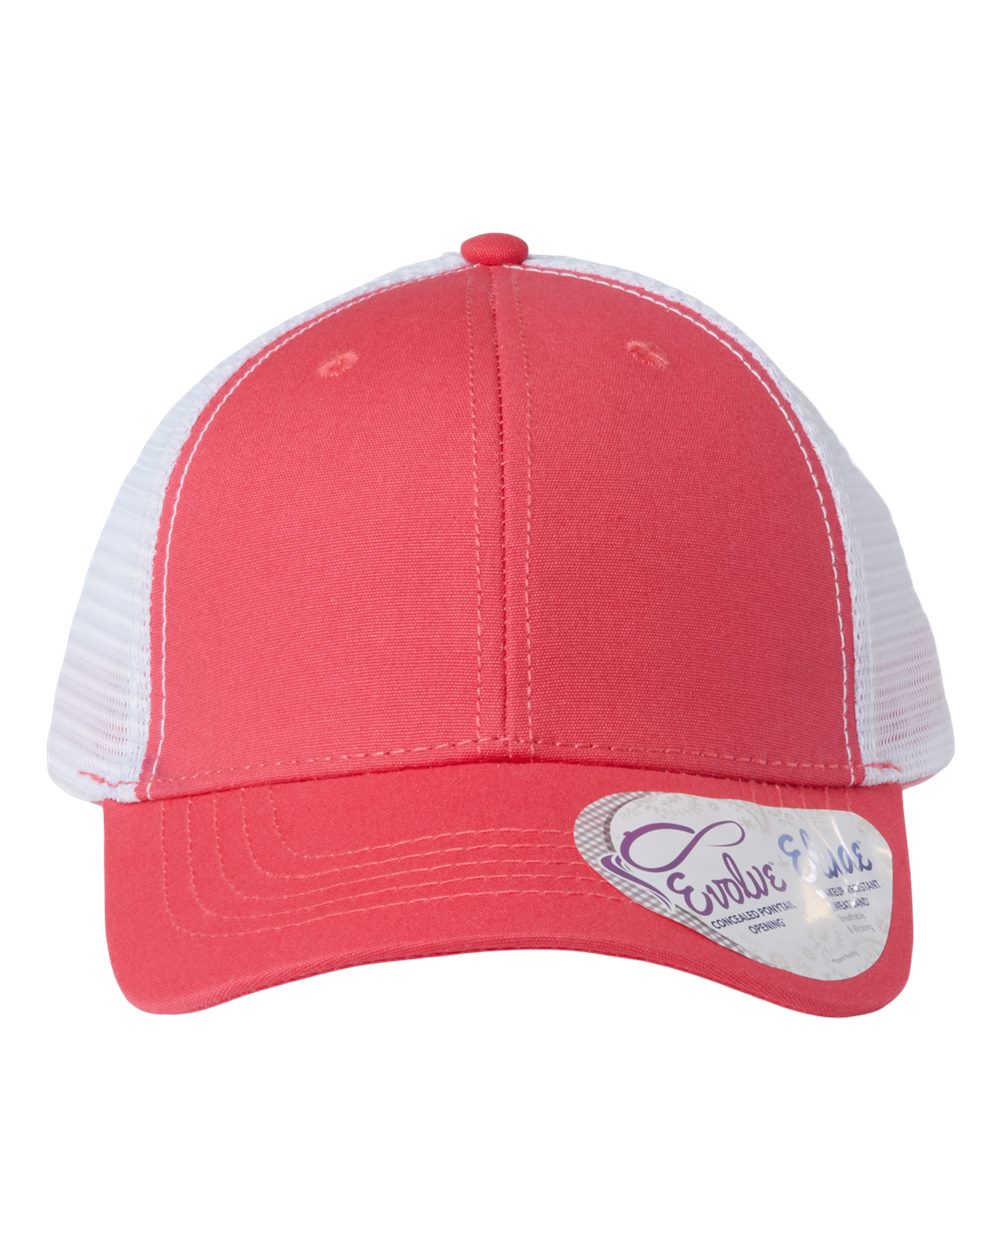 A women's modern trucker cap in coral with white mesh back.